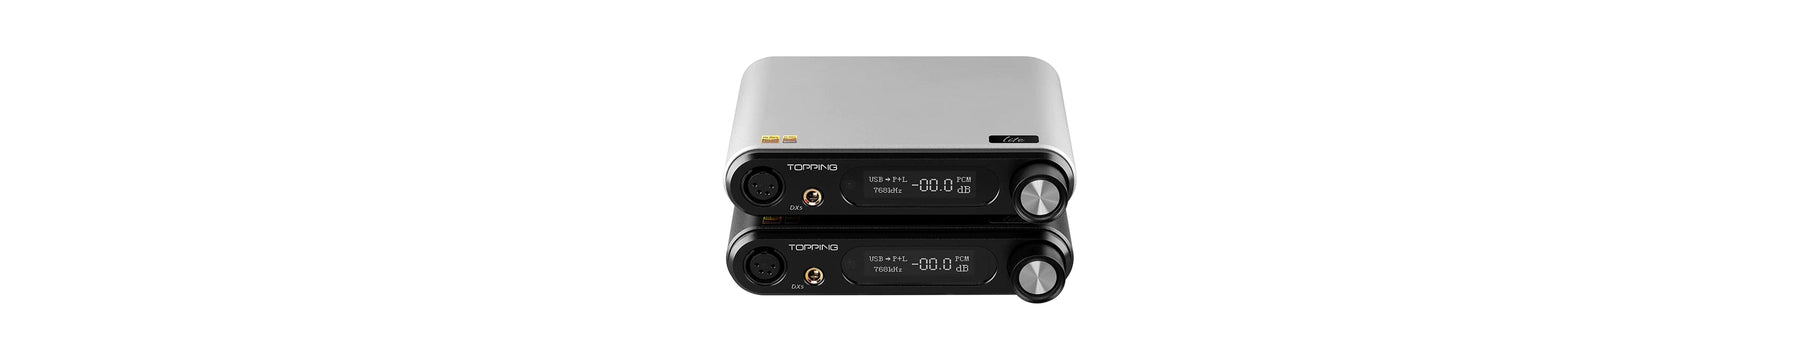 Topping Introduces DX5 Lite: Latest All-in-One Desktop DAC/AMP with Dual ES9068AS DAC Chips and NFCA Headphone Amplifier